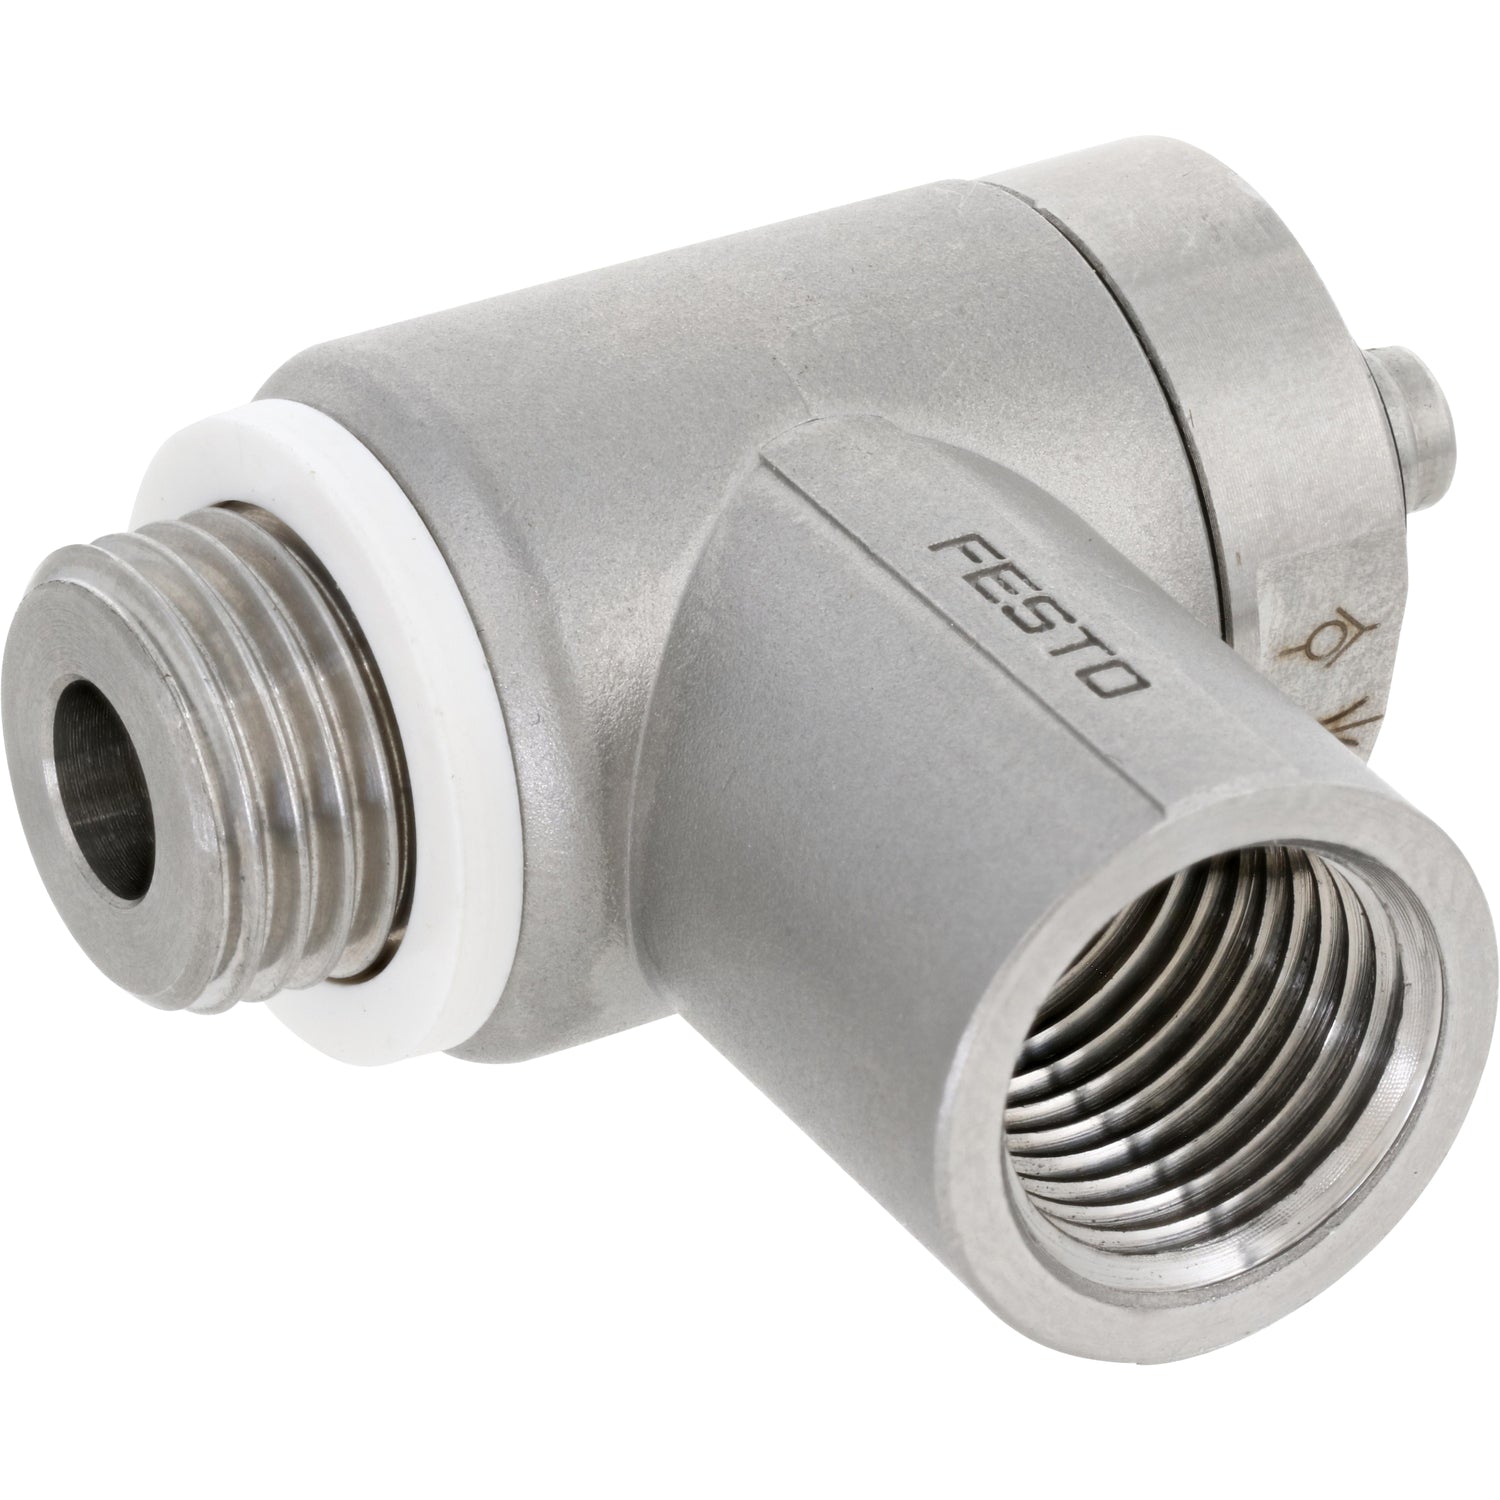 Stainless steel one-way flow control valve on white background. 